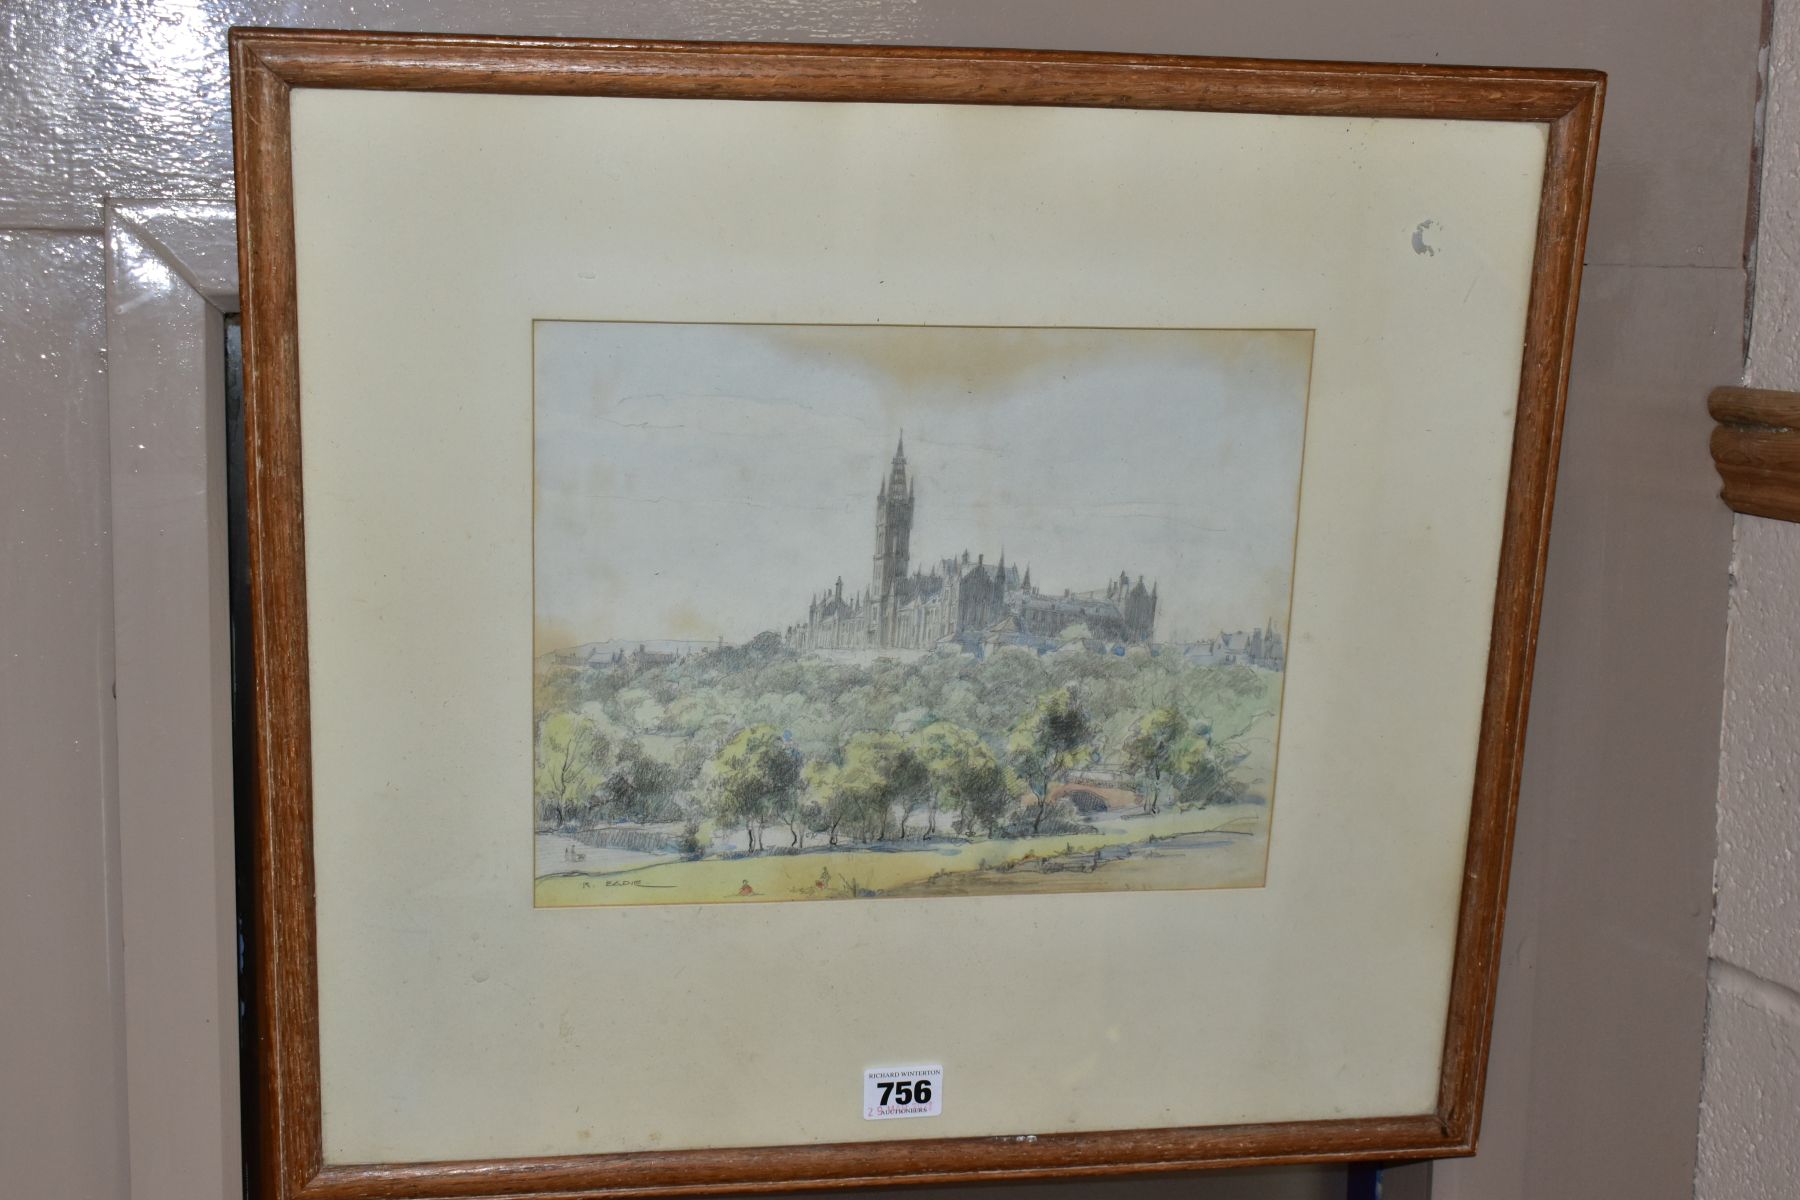 ROBERT EADIE (1877-1954) 'MARISCHAL COLLEGE ABERDEEN', signed bottom right, watercolour and pencil